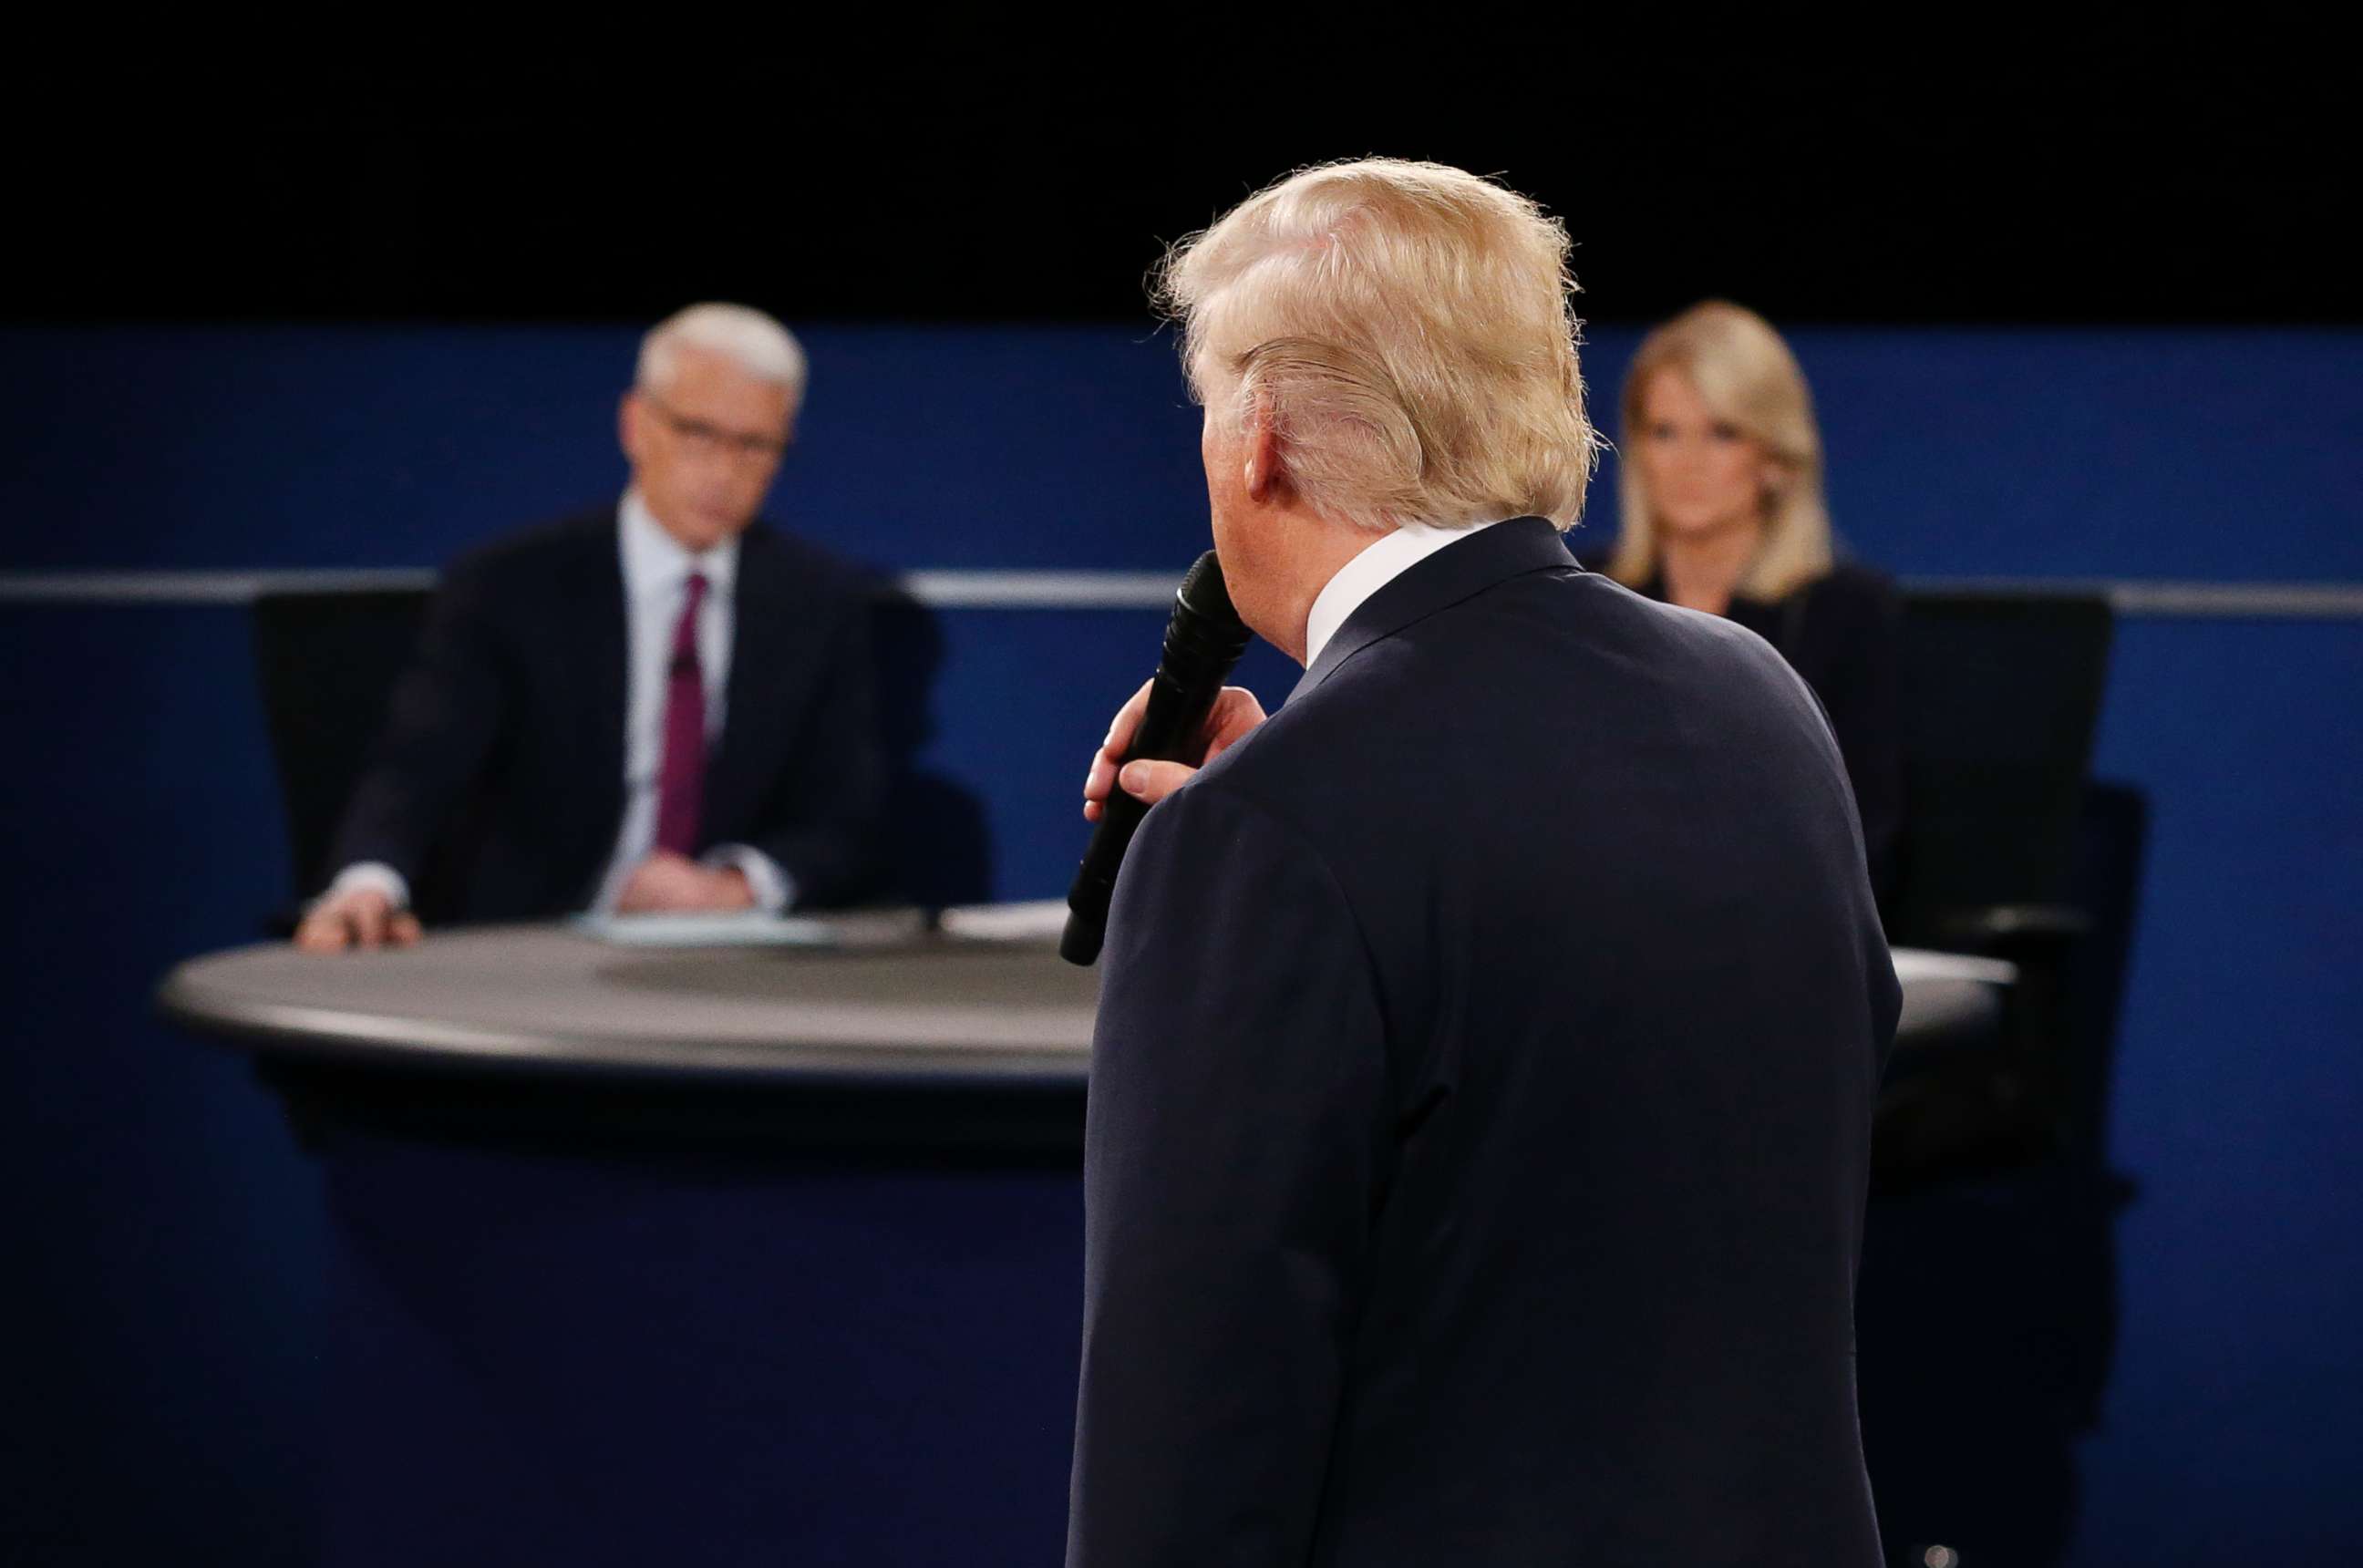 PHOTO: Moderators Anderson Cooper and Martha Raddatz listen as Republican presidential nominee Donald Trump speaks during the second debate at Washington University in St. Louis, Missouri on Oct. 9, 2016.